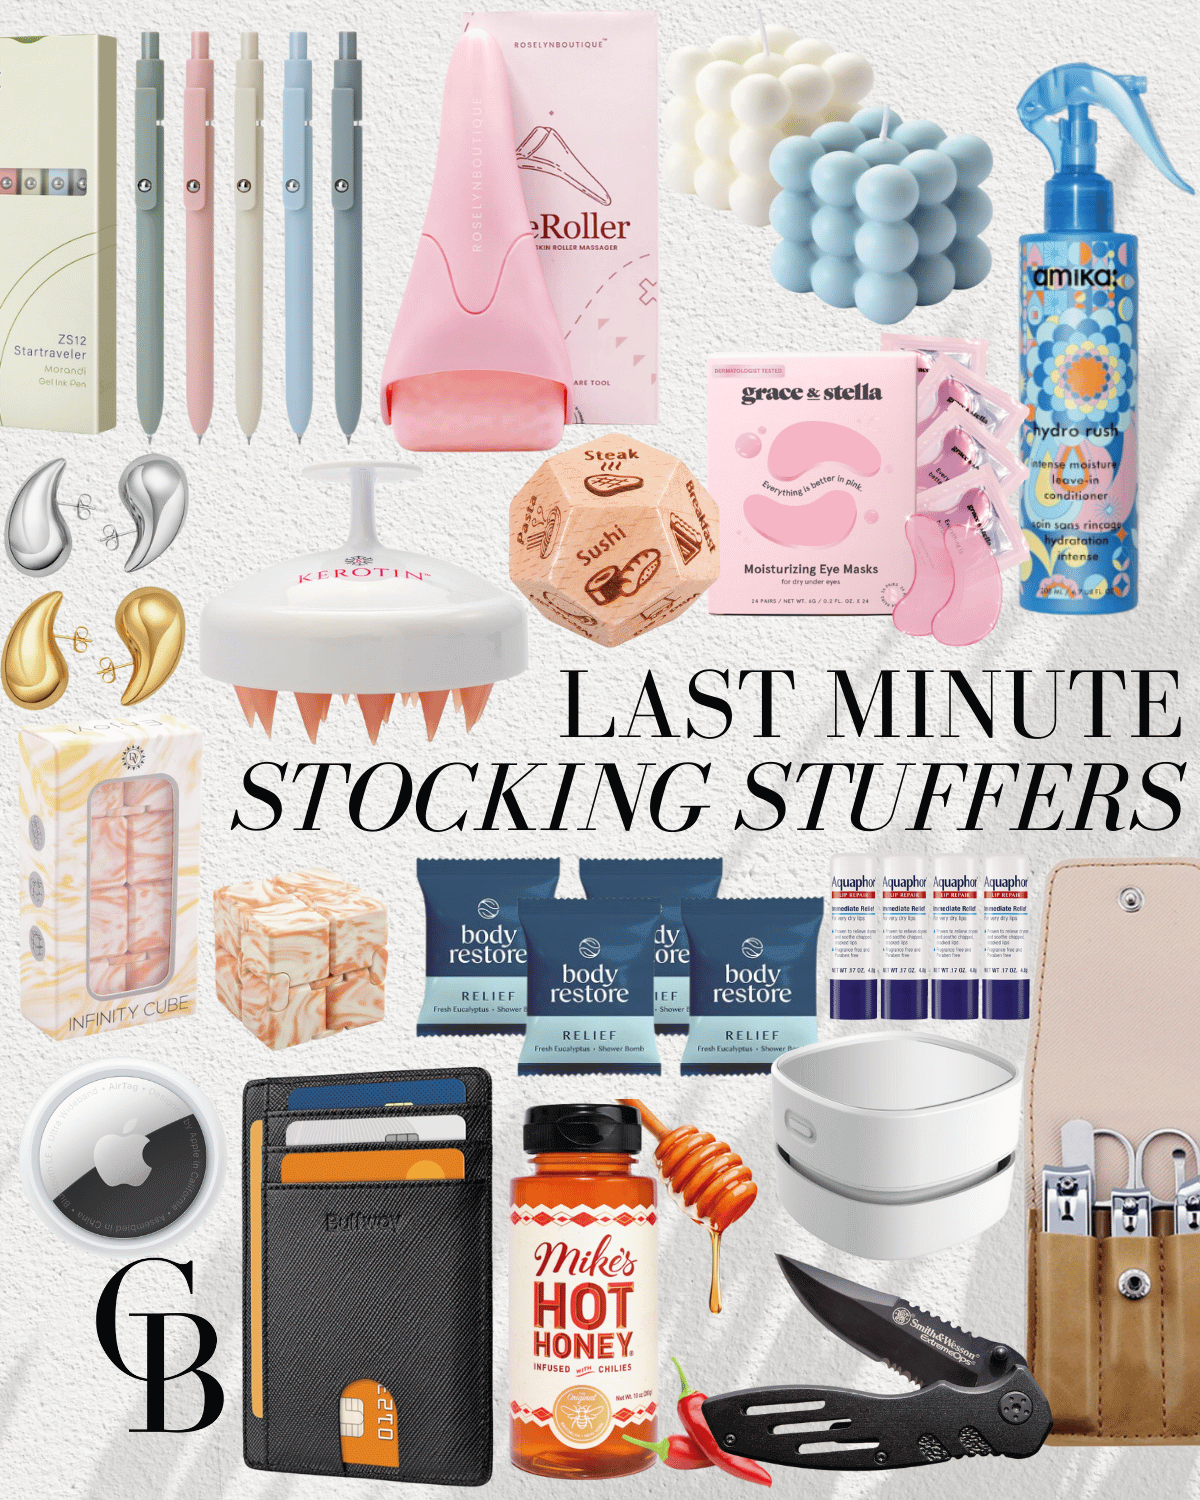 last minute gift ideas | #last #minute #gifts #giftideas #stockingstuffer #stockings #pens #haircare #airtag #showersteamers #iceroller #haircare #fidgetcube